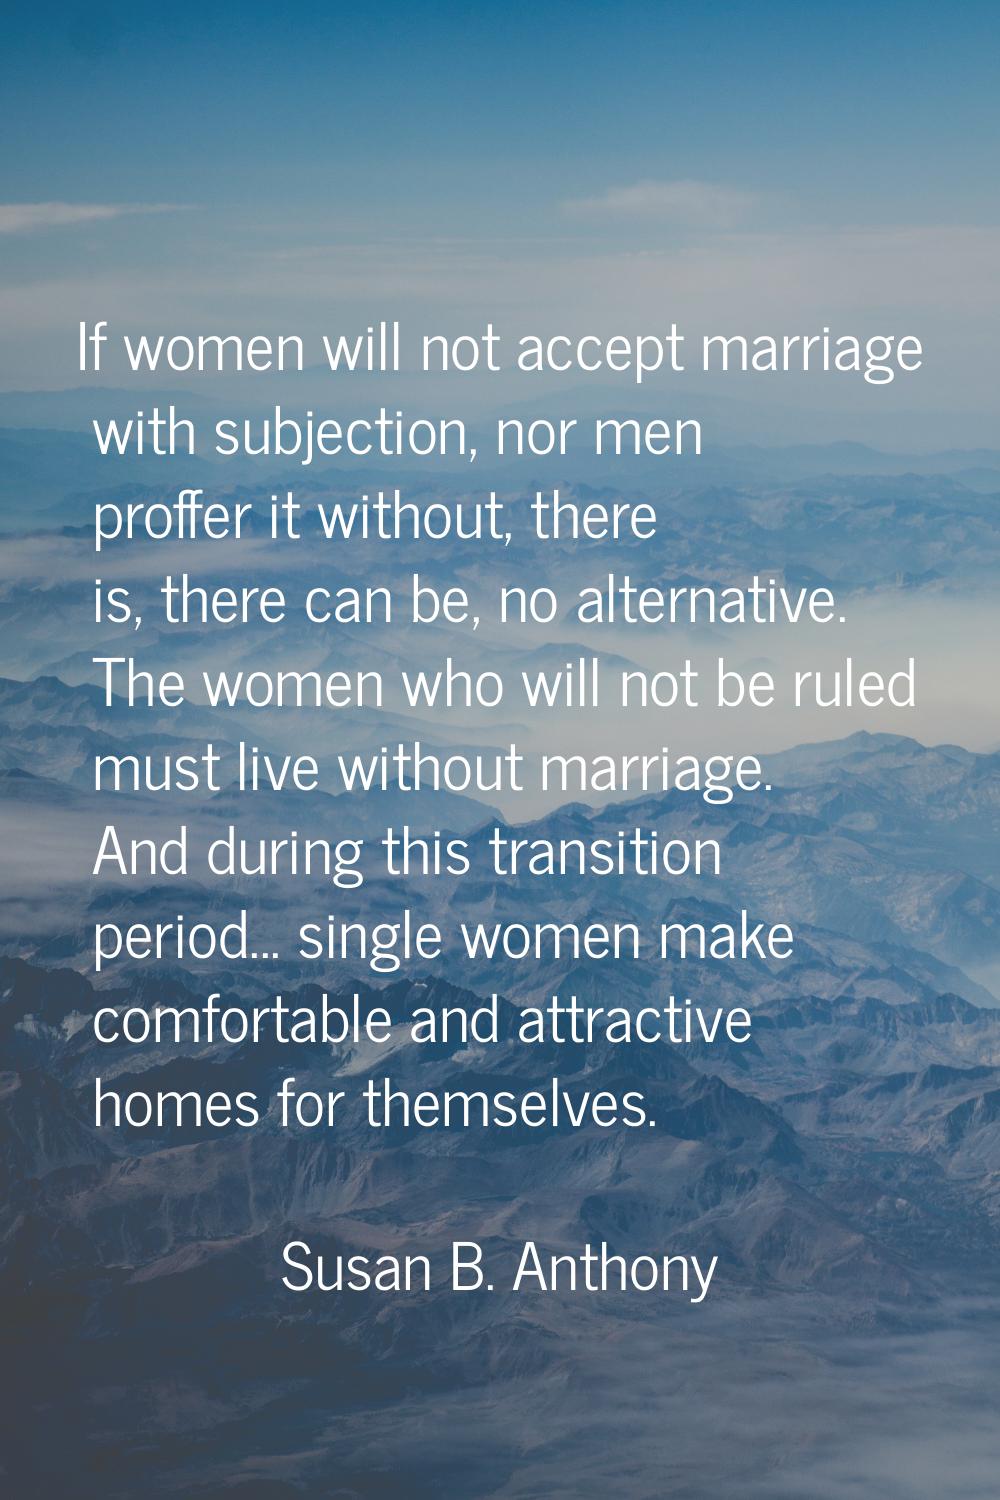 If women will not accept marriage with subjection, nor men proffer it without, there is, there can 